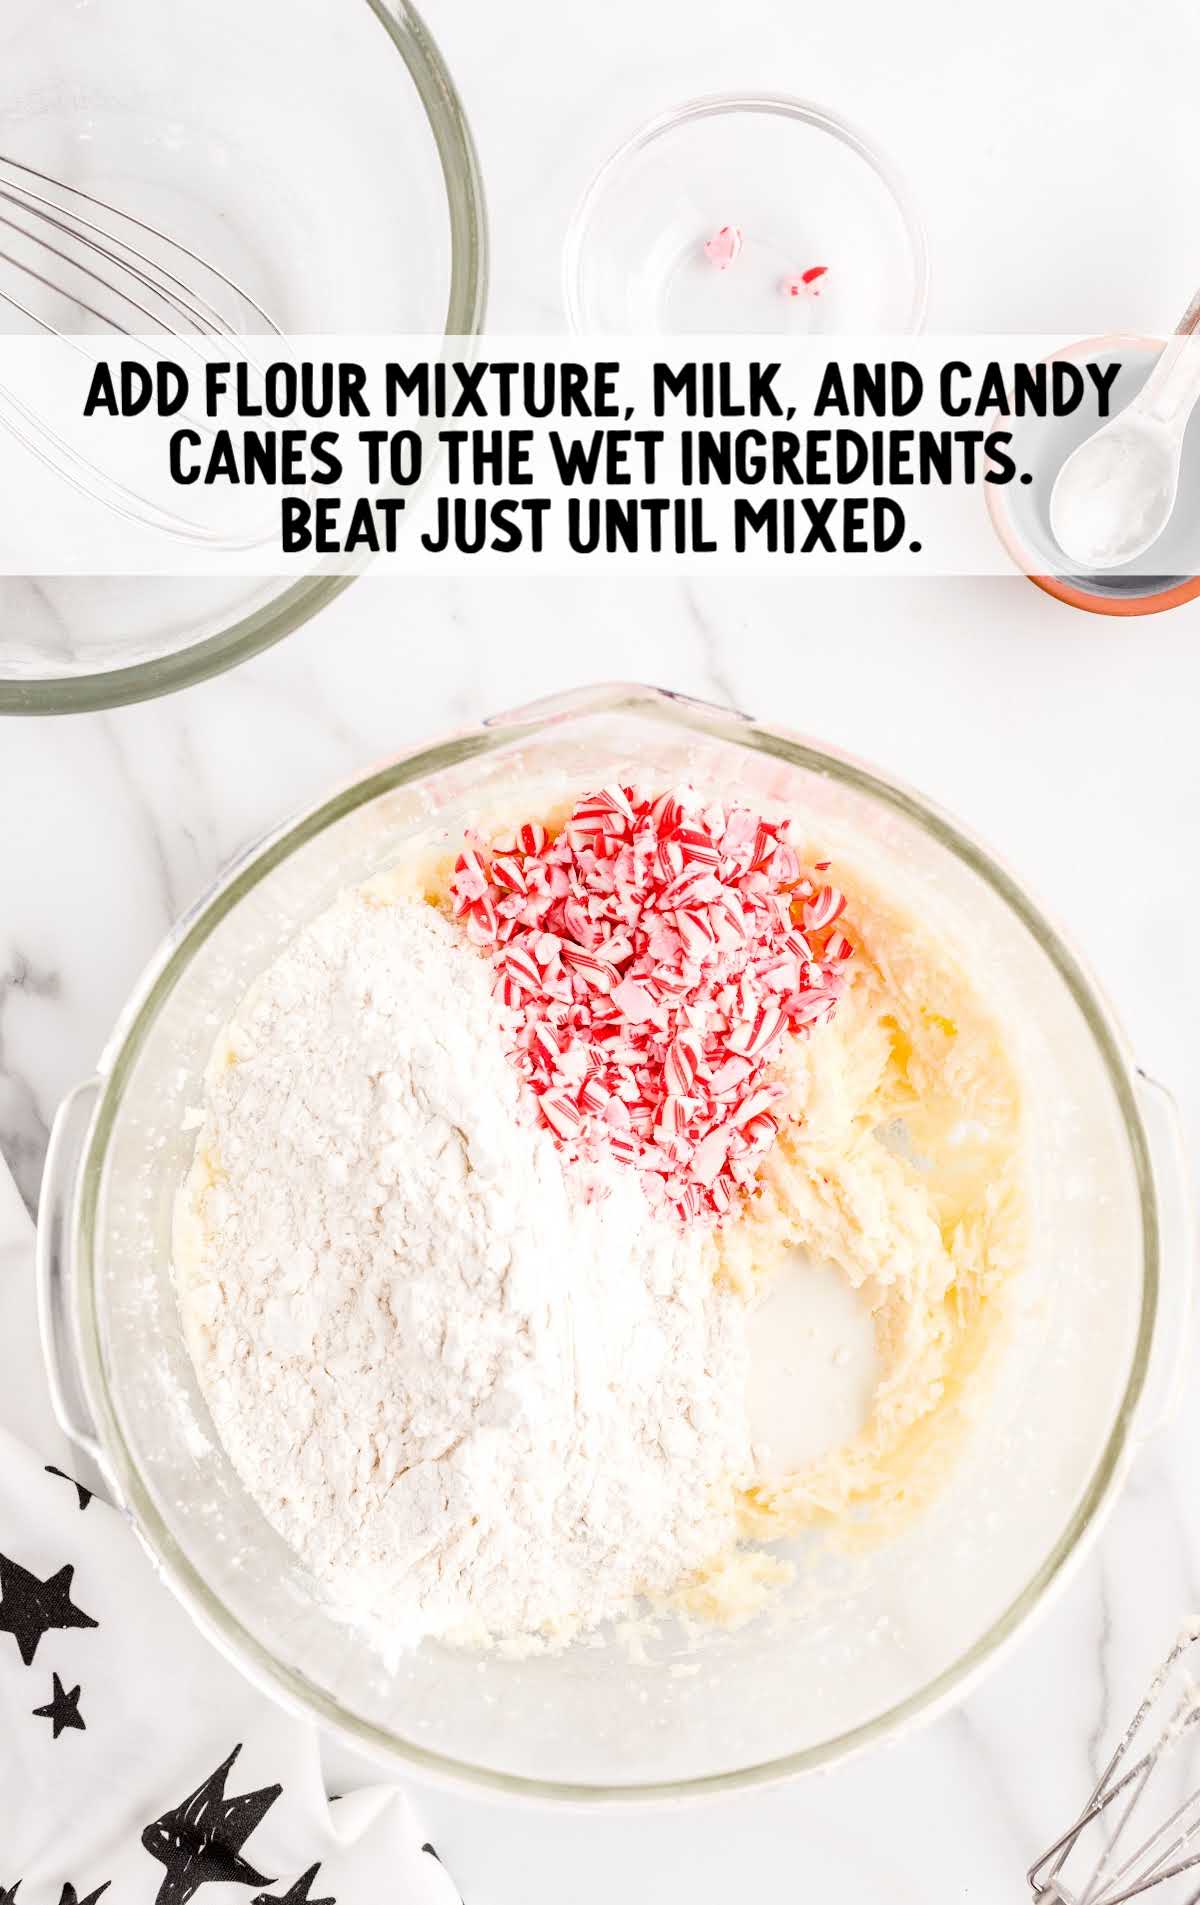 flour mixture, milk, and candy canes added to the wet ingredients in a bowl